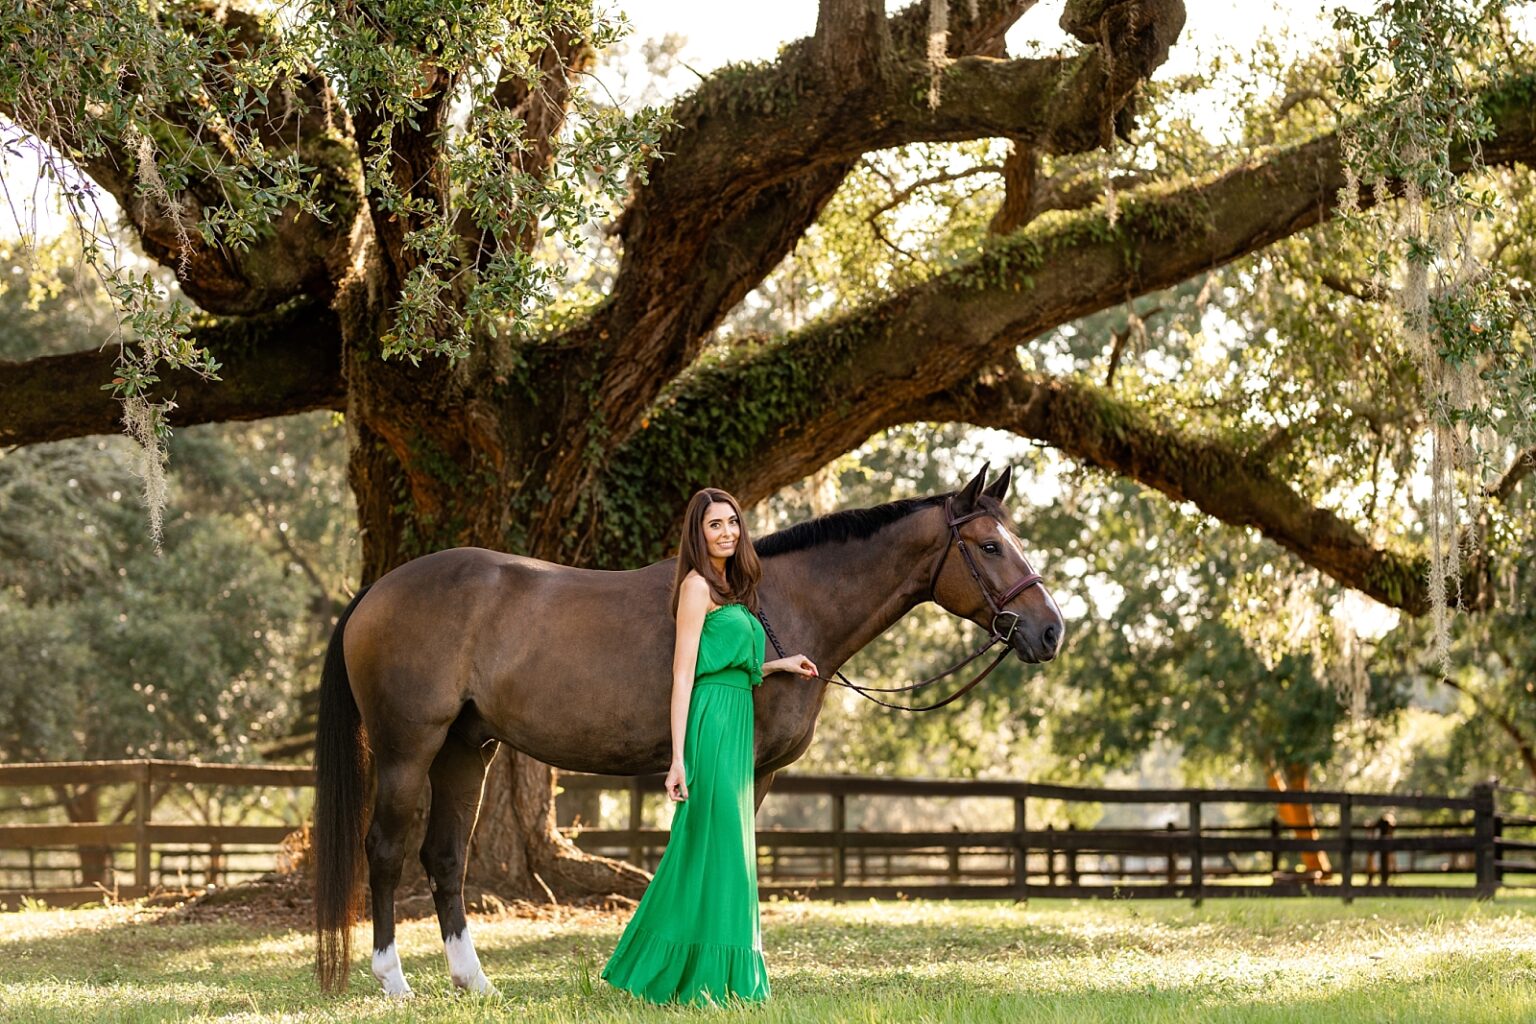 Best horse photographer in Tallahassee takes photos of woman in gorgeous green dress with her Warmblood horse underneath historic oak trees. Posing ideas for horse and rider photoshoot.